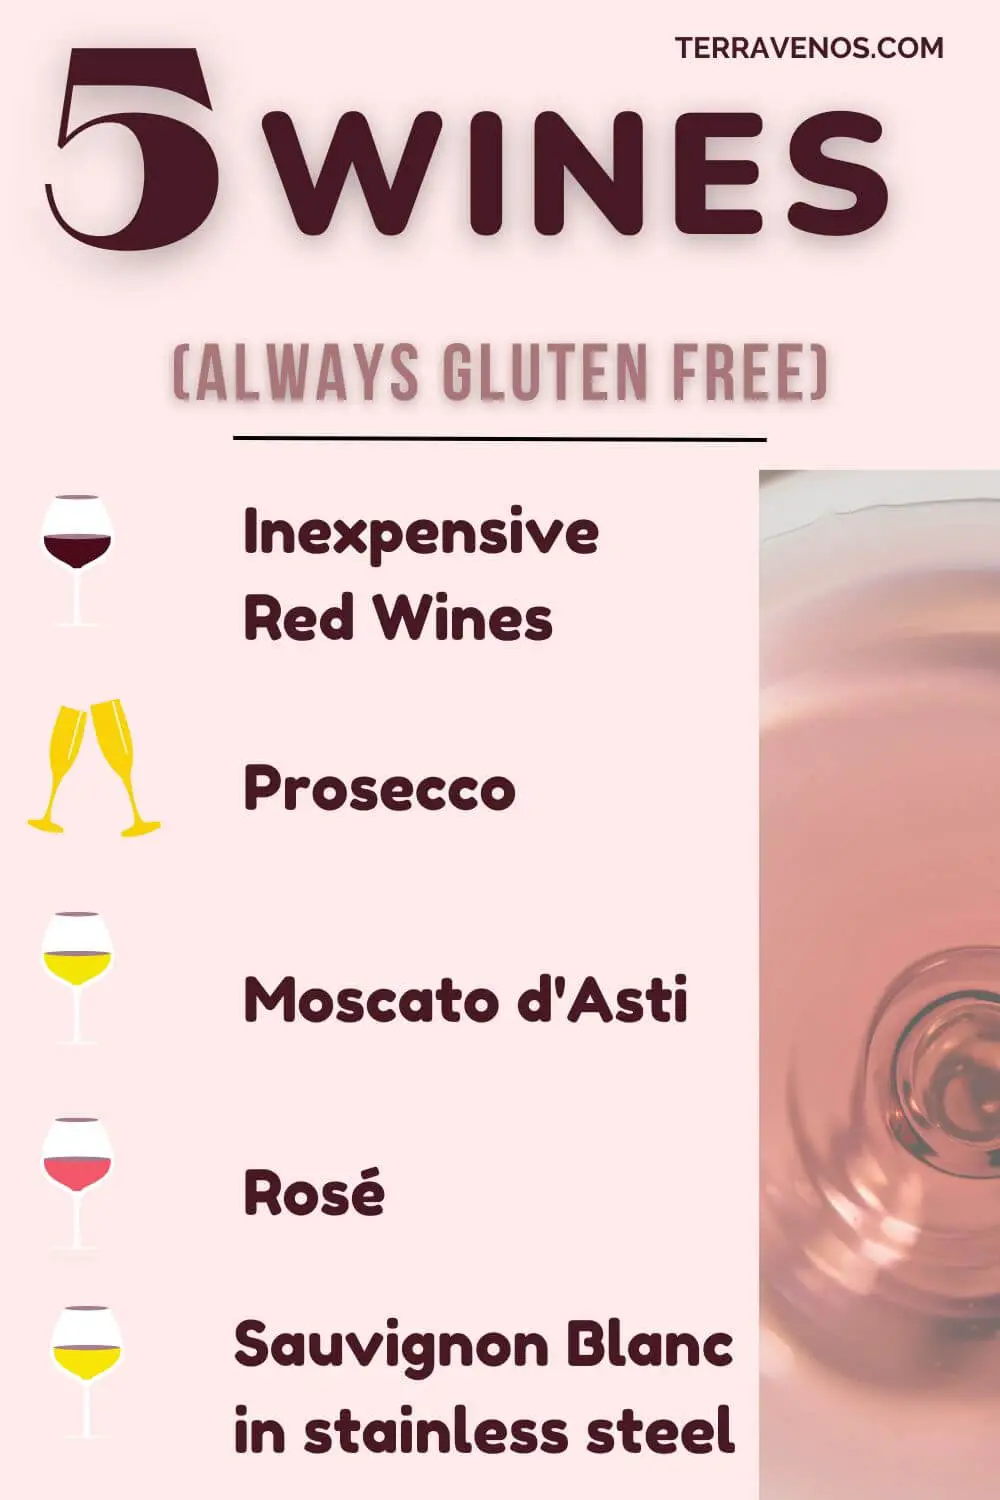 what wines are always gluten free - infographic